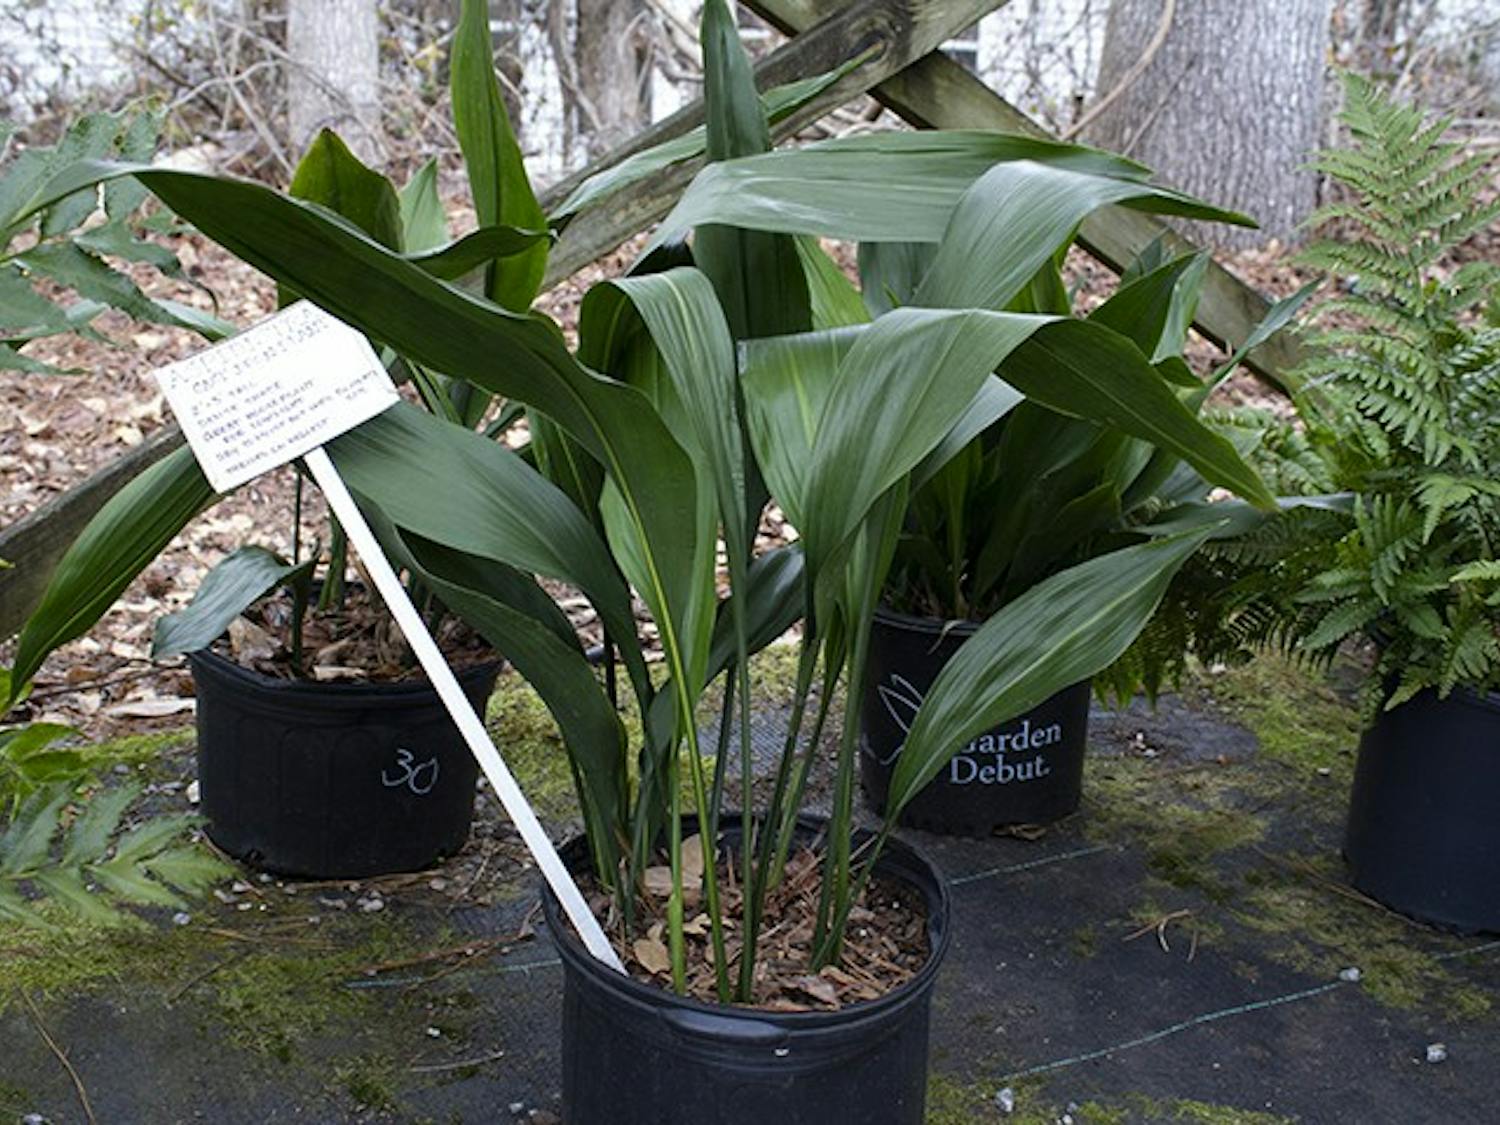 CAST-IRON- Aspidistra elatior, or the cast-iron plant, can grow just about anywhere. Not only does it require low to medium light, but it also doesn’t need a lot of water. It is recommended that the soil be completely dry before watering and that some humidity is provided every two to three days to give your plant the best chance at growing. This plant also flowers, producing white seed heads. 